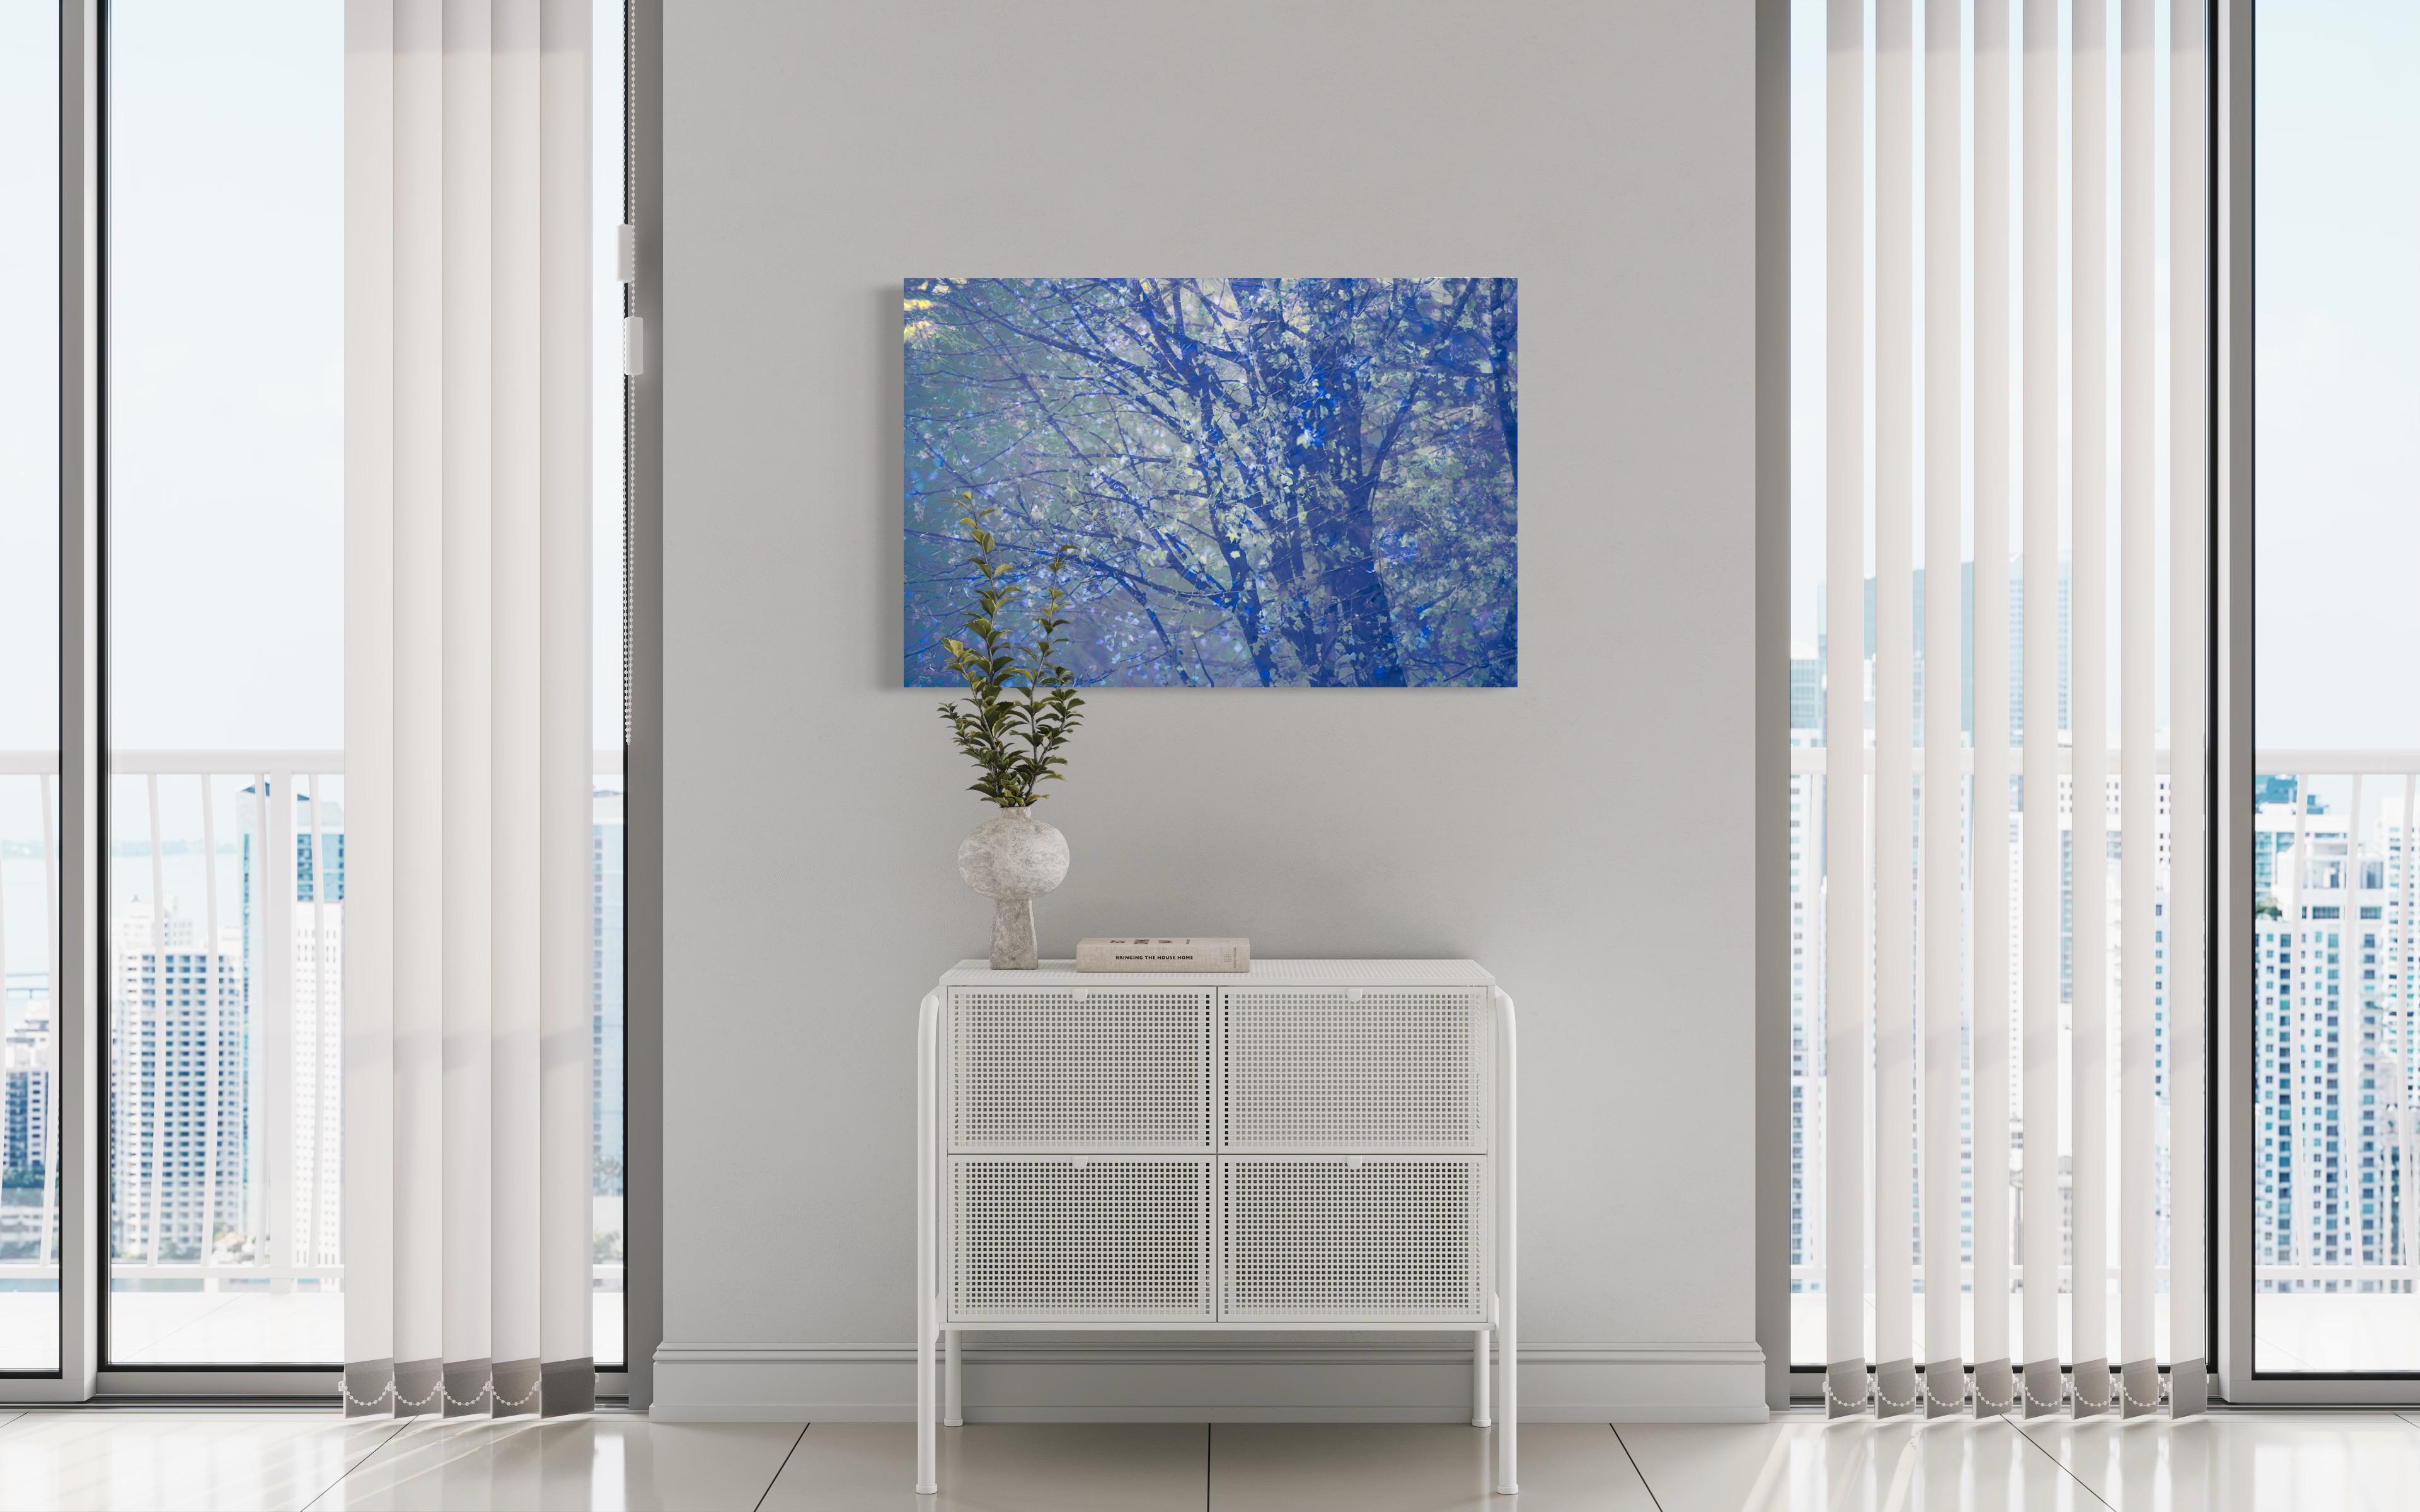 This abstract photograph by Tori Gagne features a cool blue palette with an abstracted view of tree branches. An edition size of 50, this photograph is available as a metal sublimation print with a 1.3” deep silver flush mount frame and white gloss